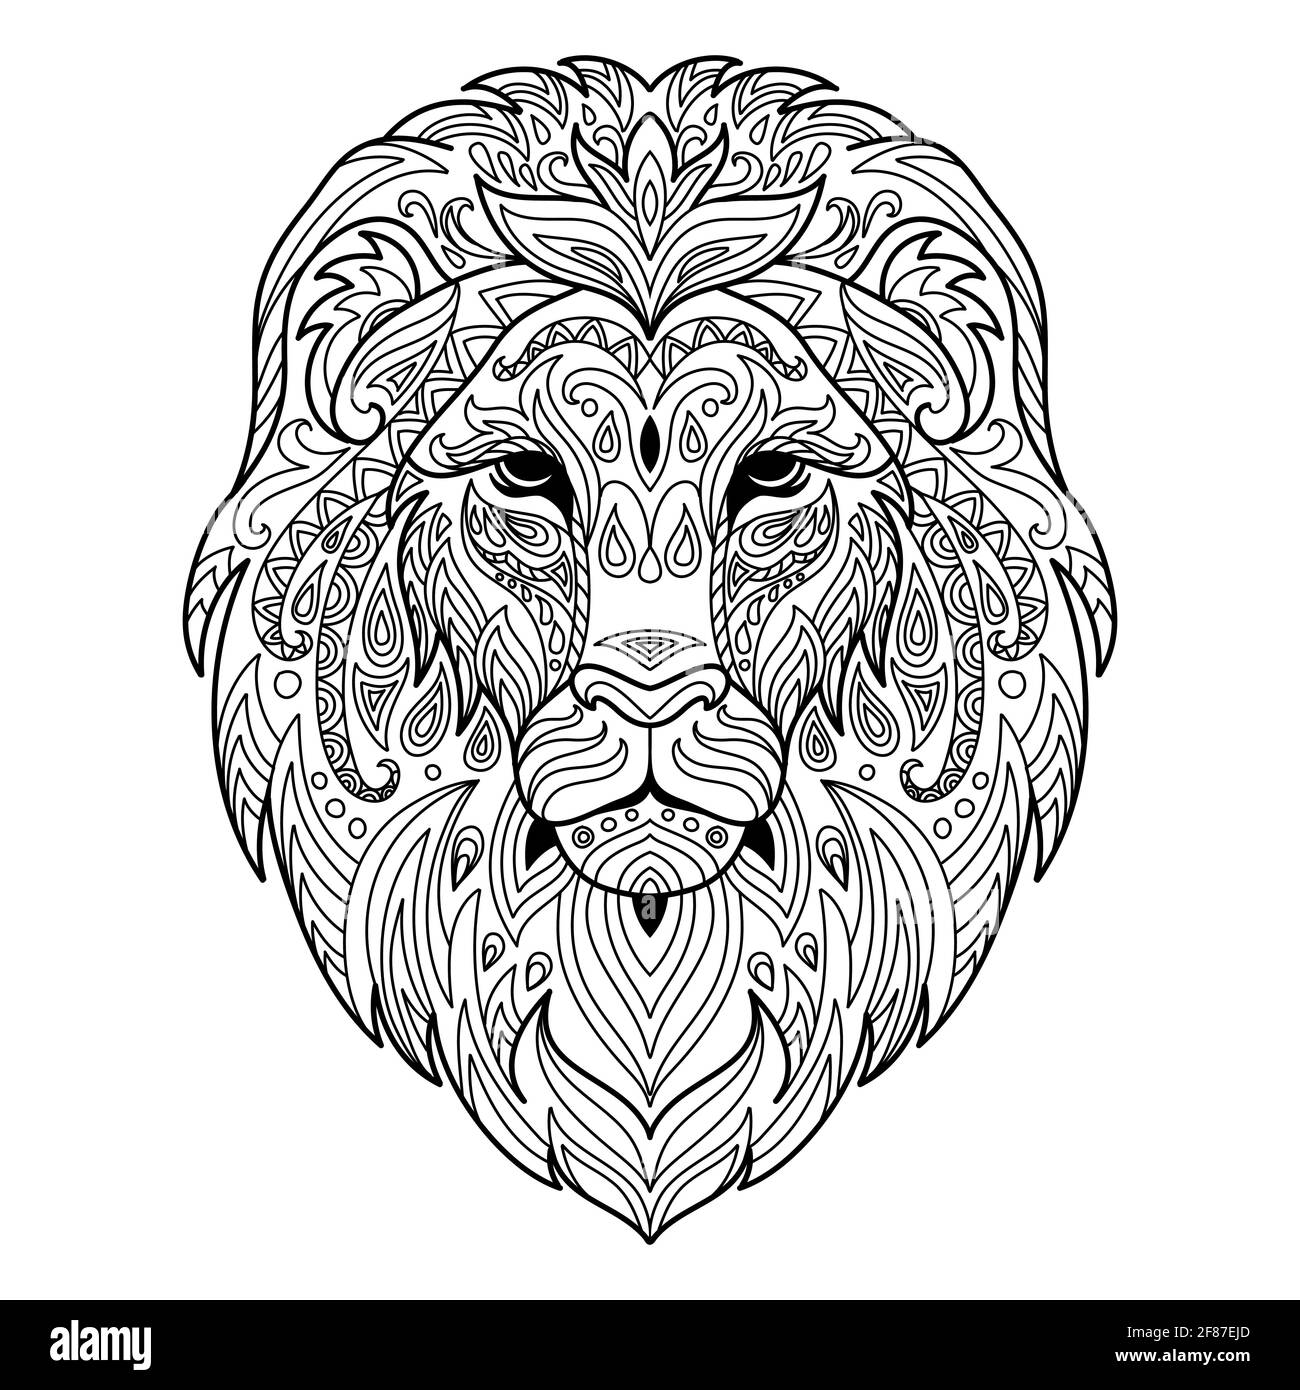 Head of lion. Abstract vector contour illustration isolated on white background. For adult anti stress coloring book page with doodle and zentangle el Stock Vector